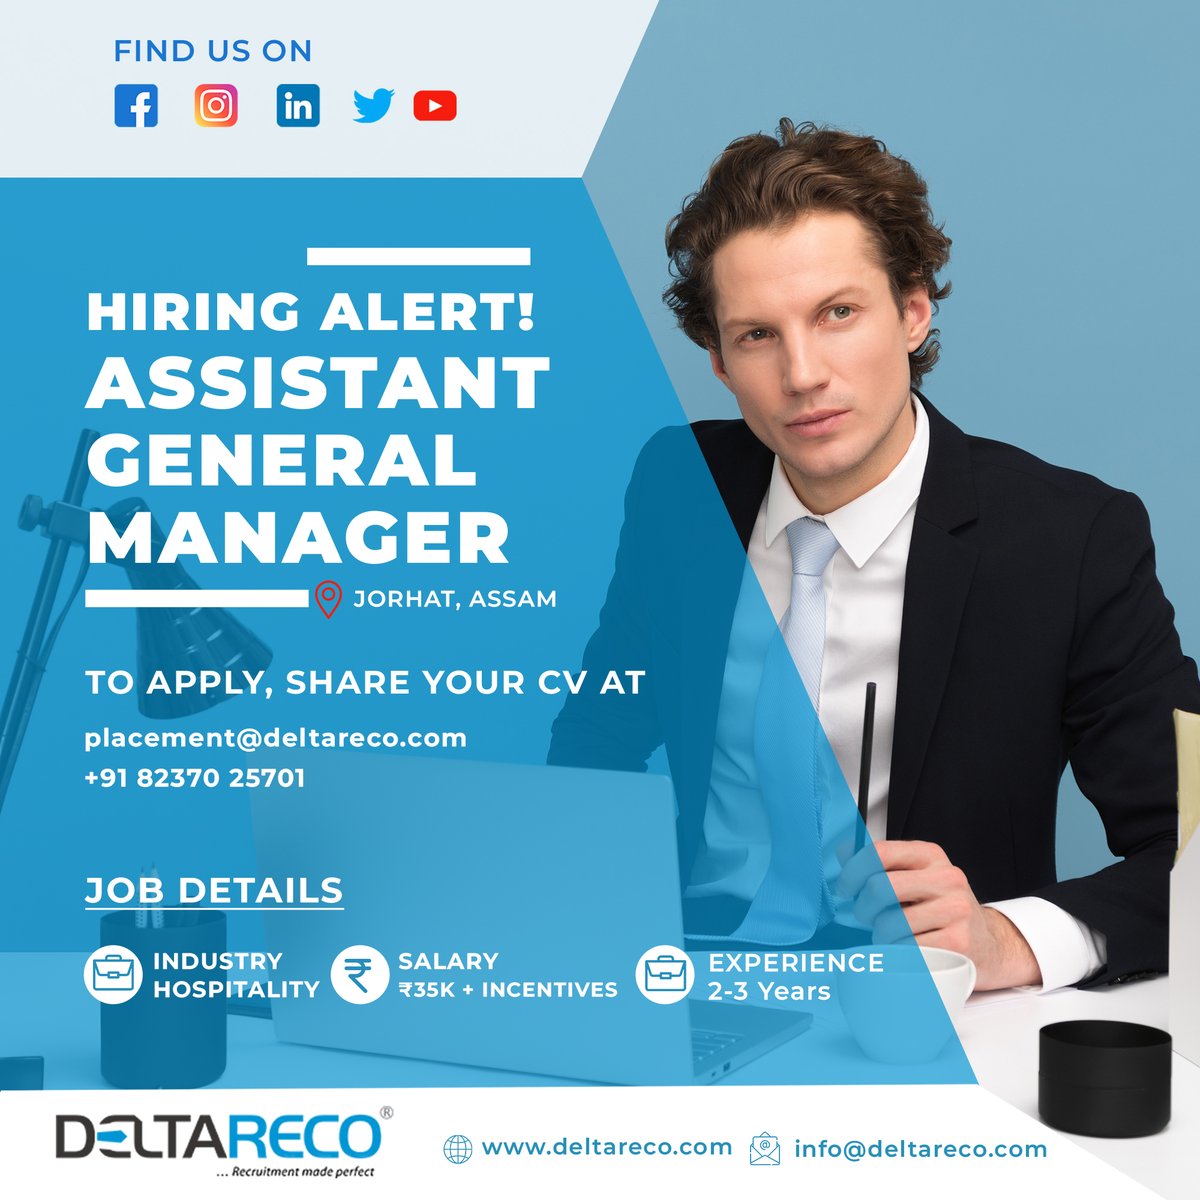 We are looking for an #assistantgeneralmanager for a well-known client in the hospitality industry.

📍 Location: Jorhat, Assam

📌 To apply, share your CV at
placement@deltareco.com
+91 8237025701

#hiringalert #hiring #assistantmanager #jorhat #hospitalityjobs #assam #deltareco